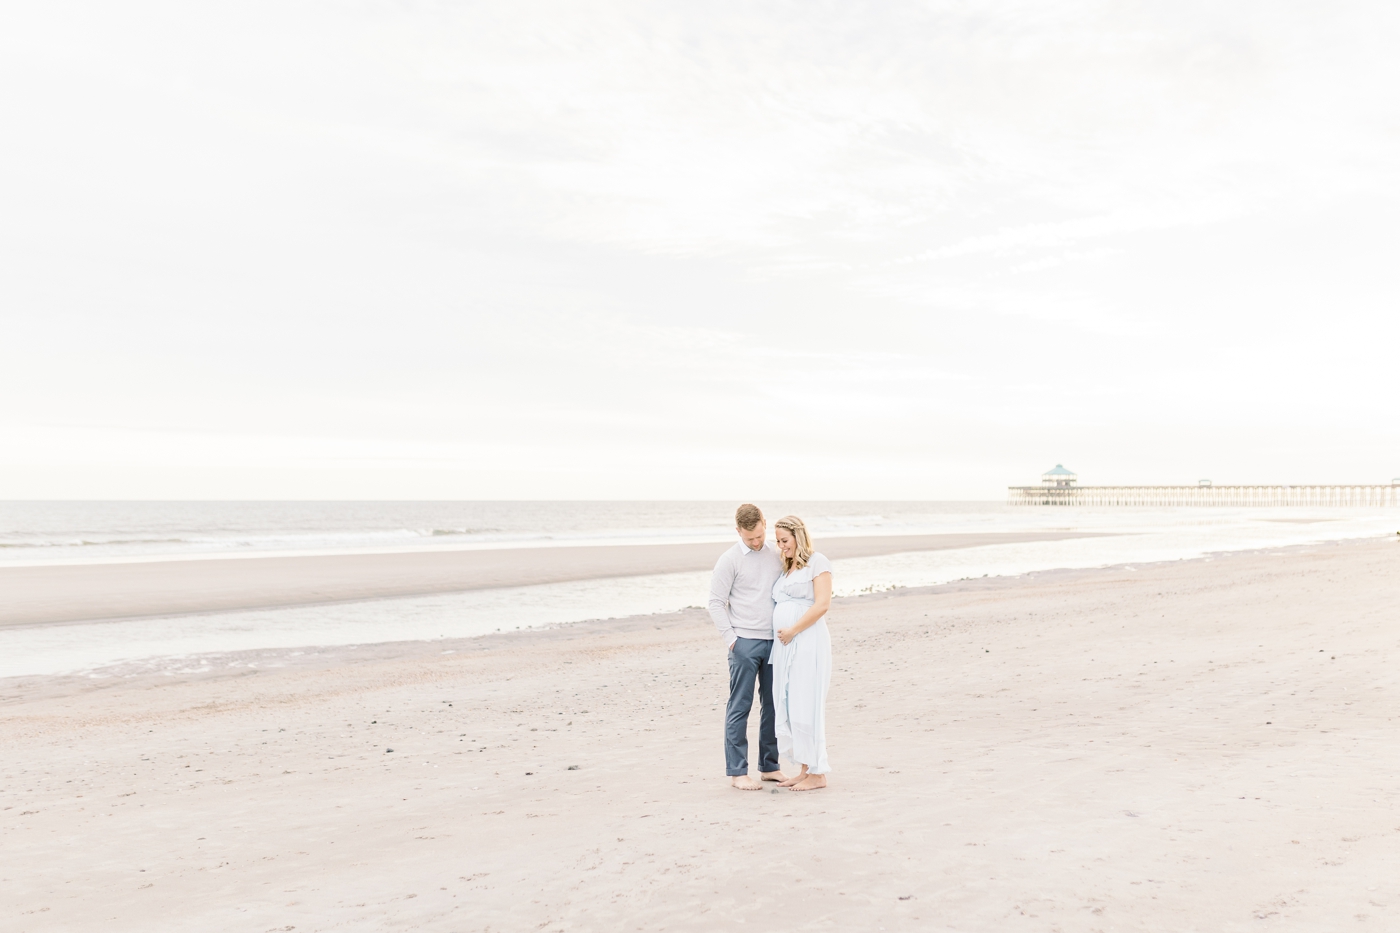 Folly Beach maternity photoshoot with the pier in the background. Photo by Caitlyn Motycka Photography.